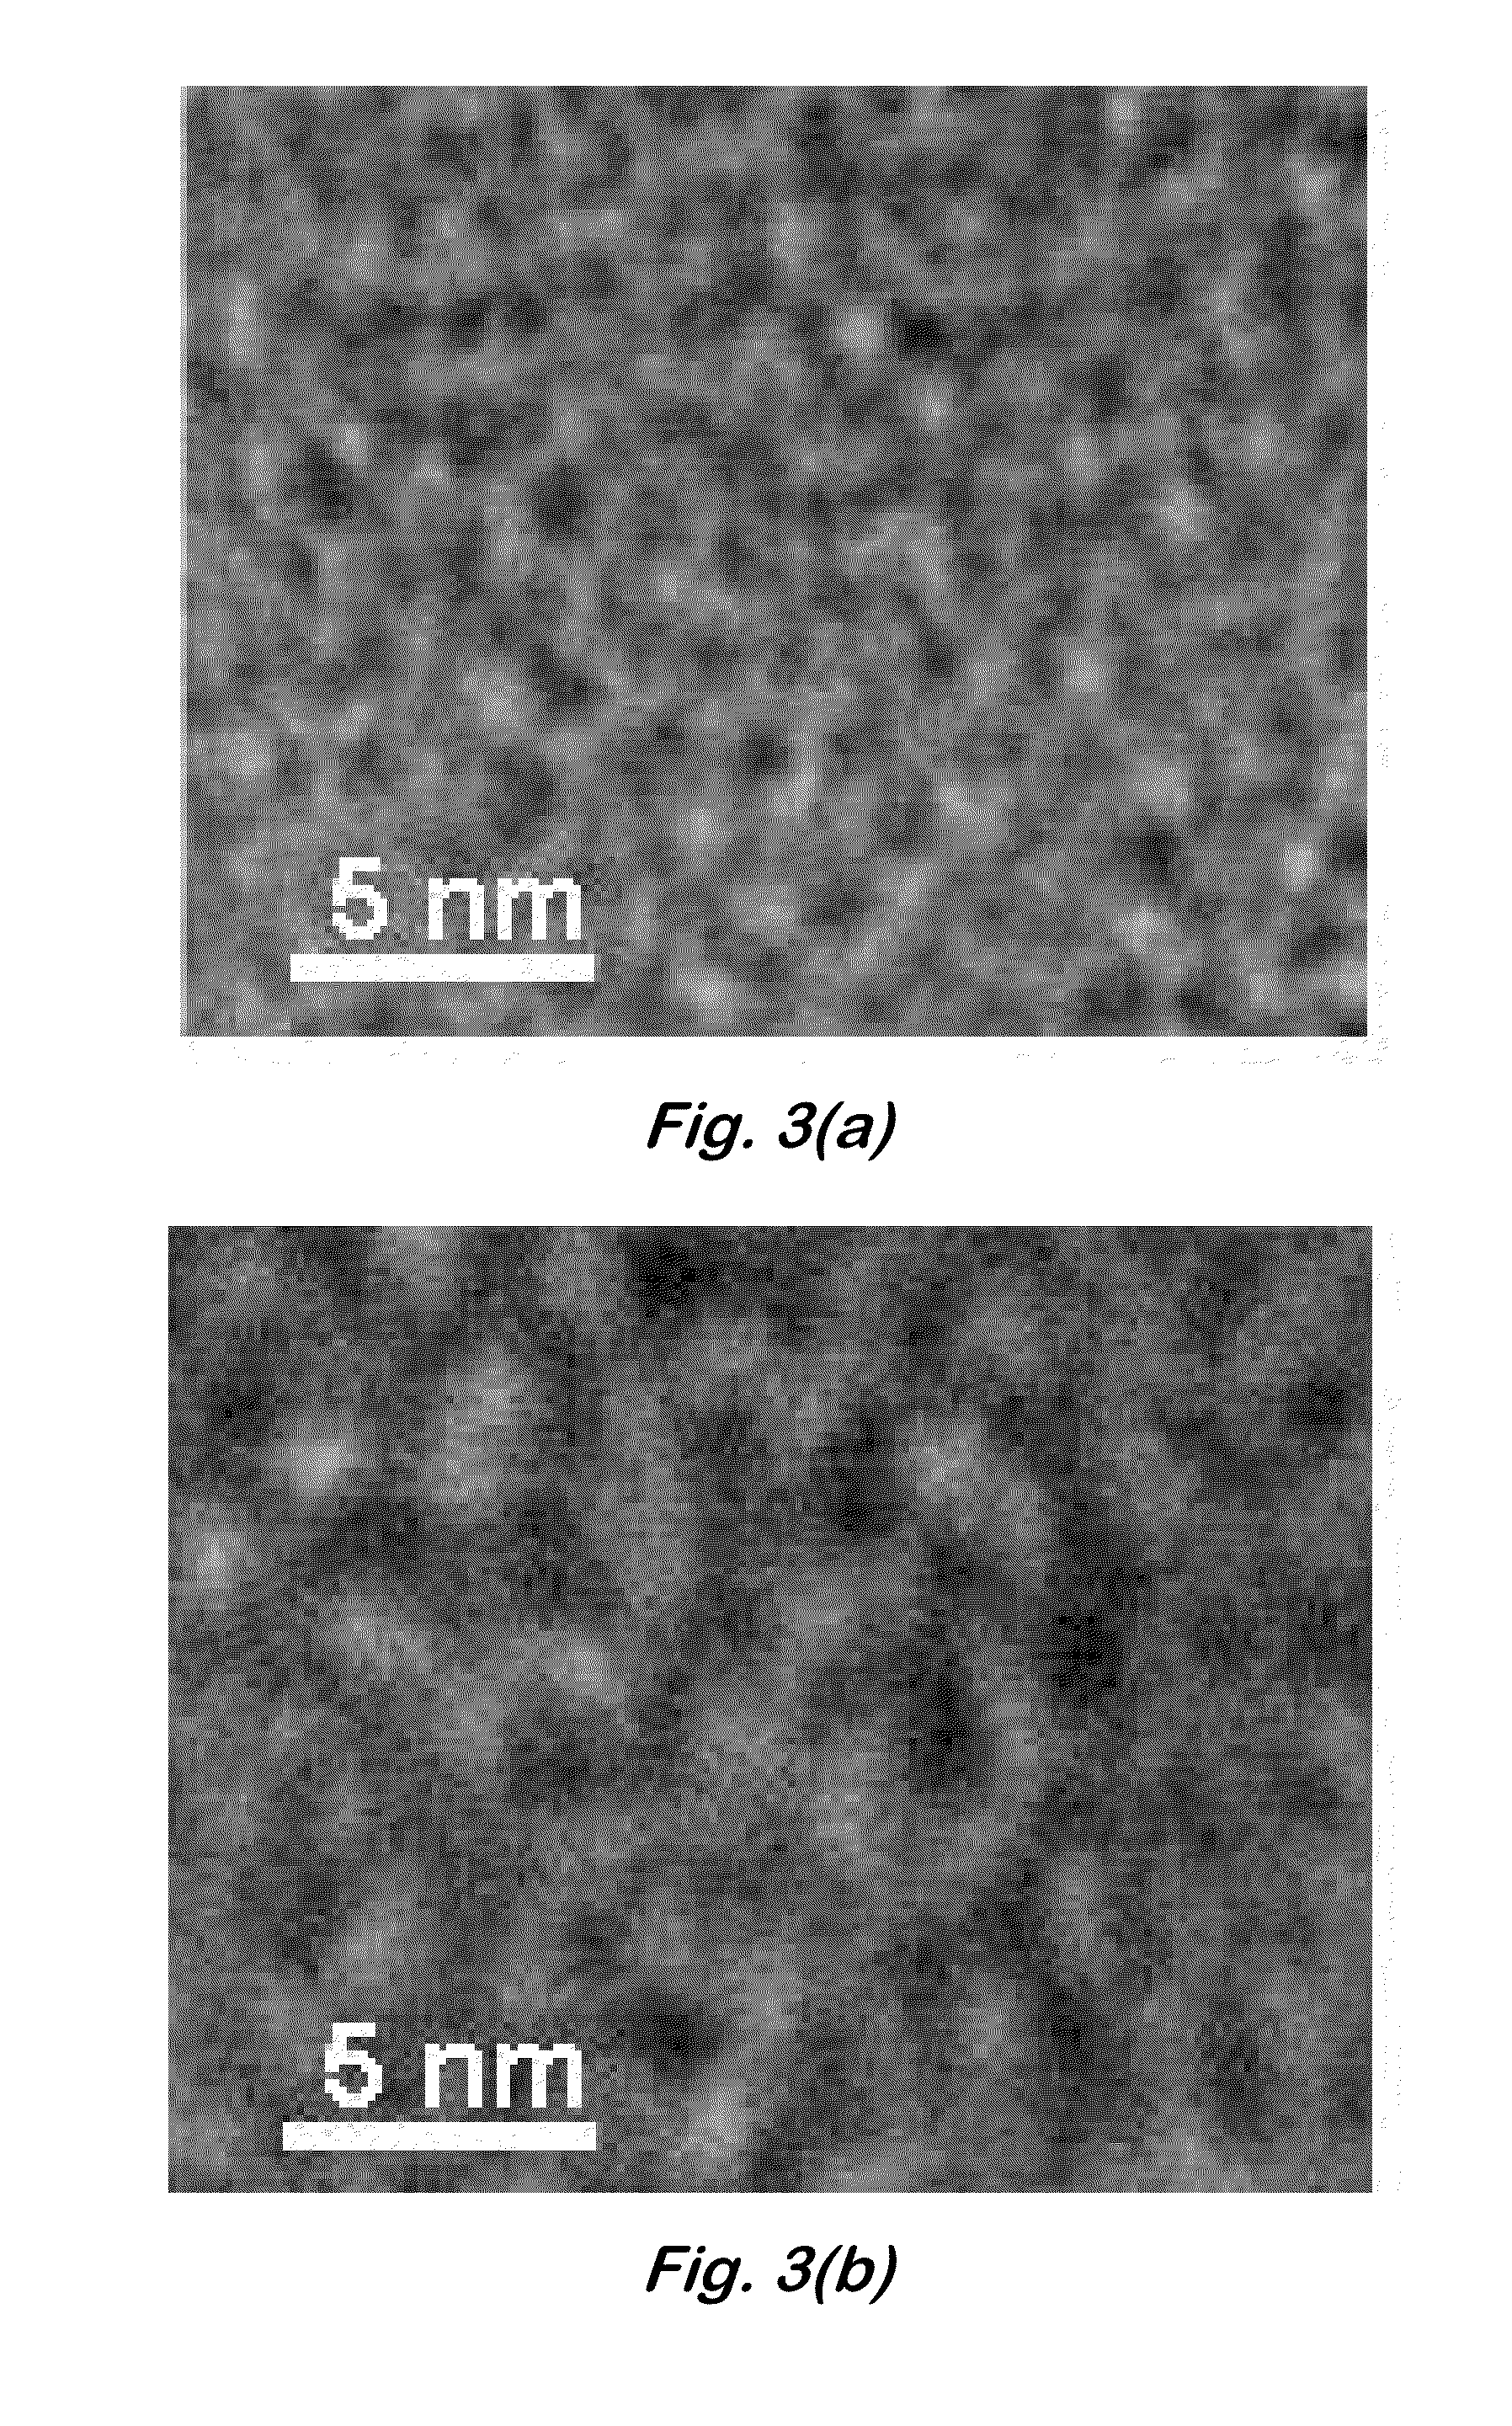 Tether-containing conducting polymers